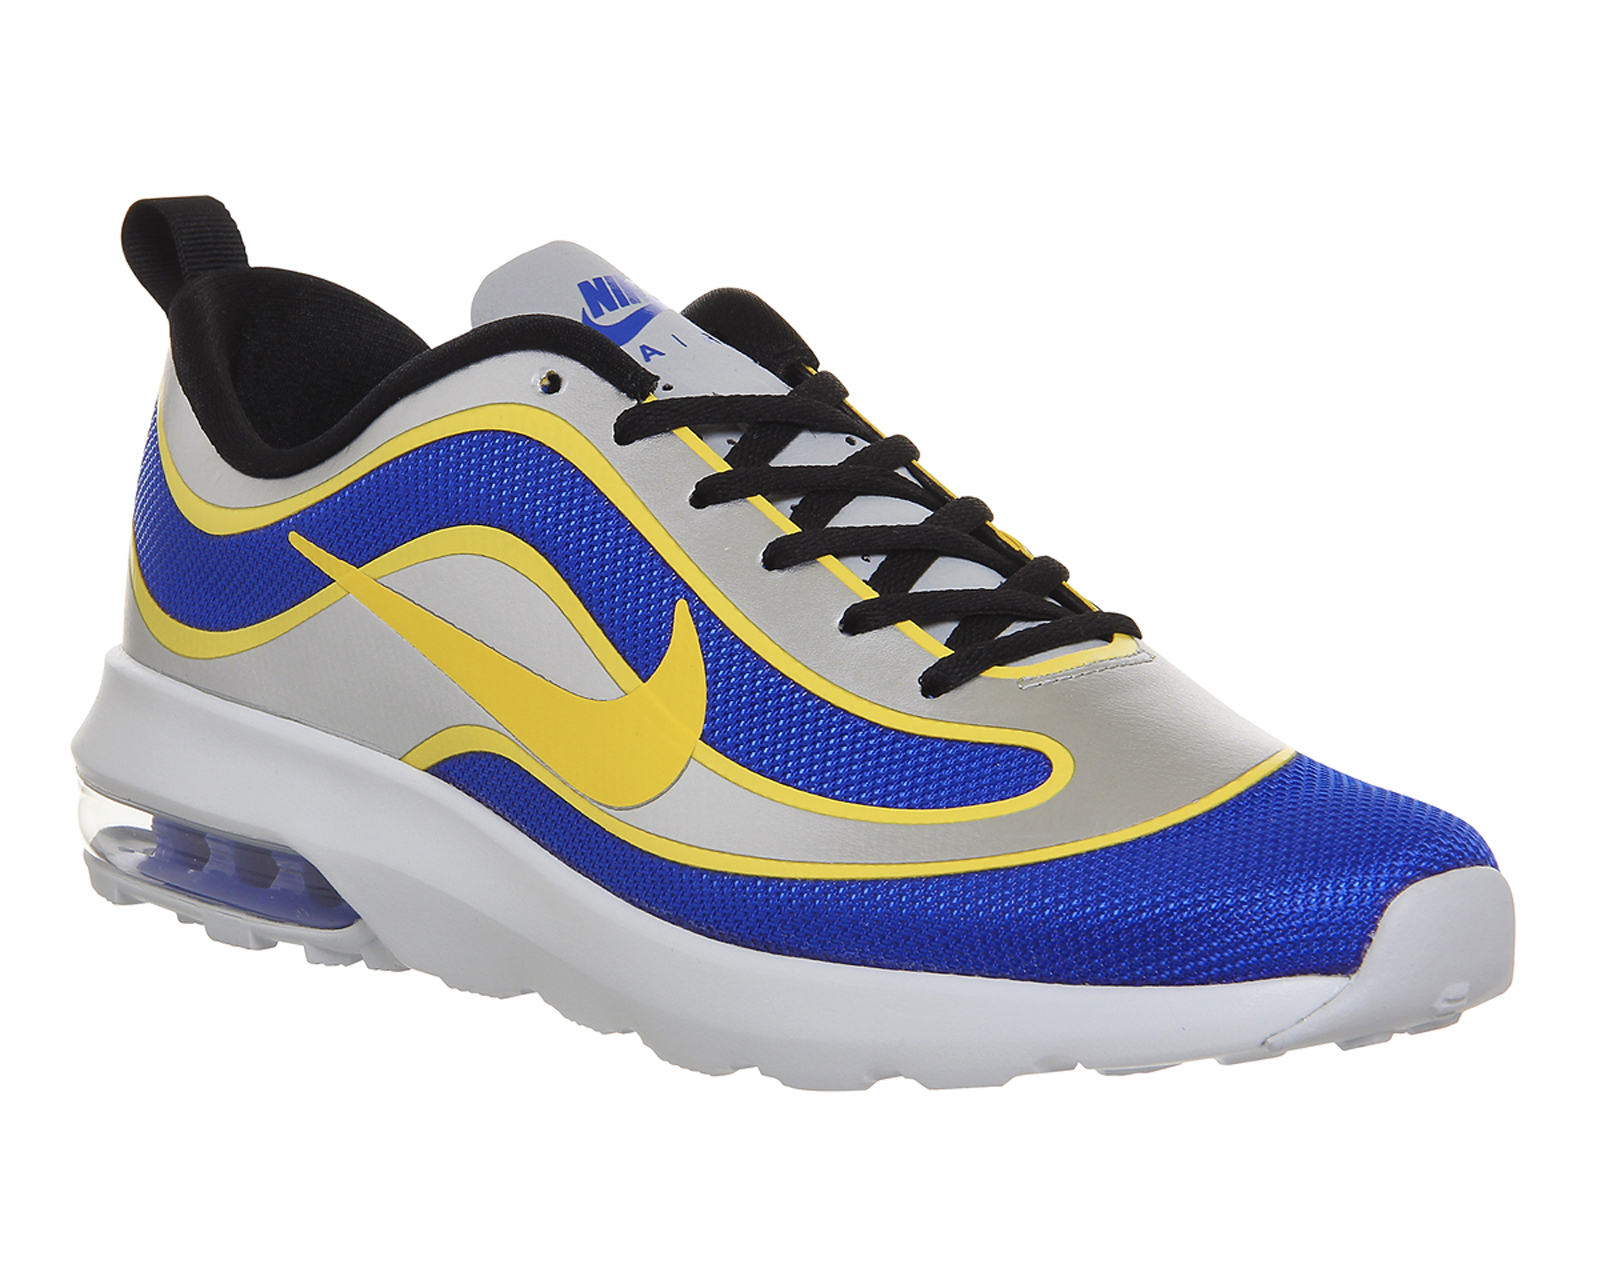 Nike Air Max Mercurial R9 Racer Blue Varsity Maize - His trainers